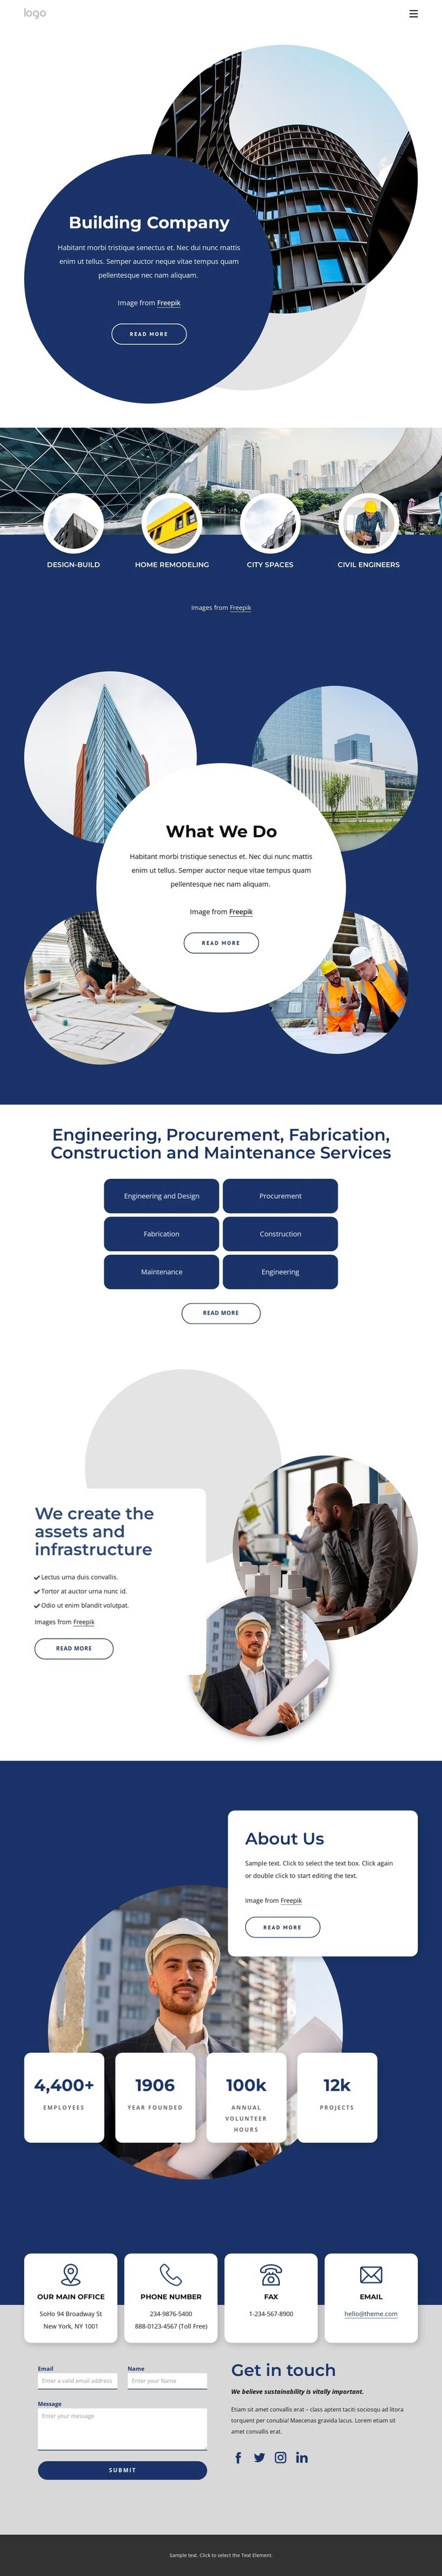 International construction services company Homepage Design